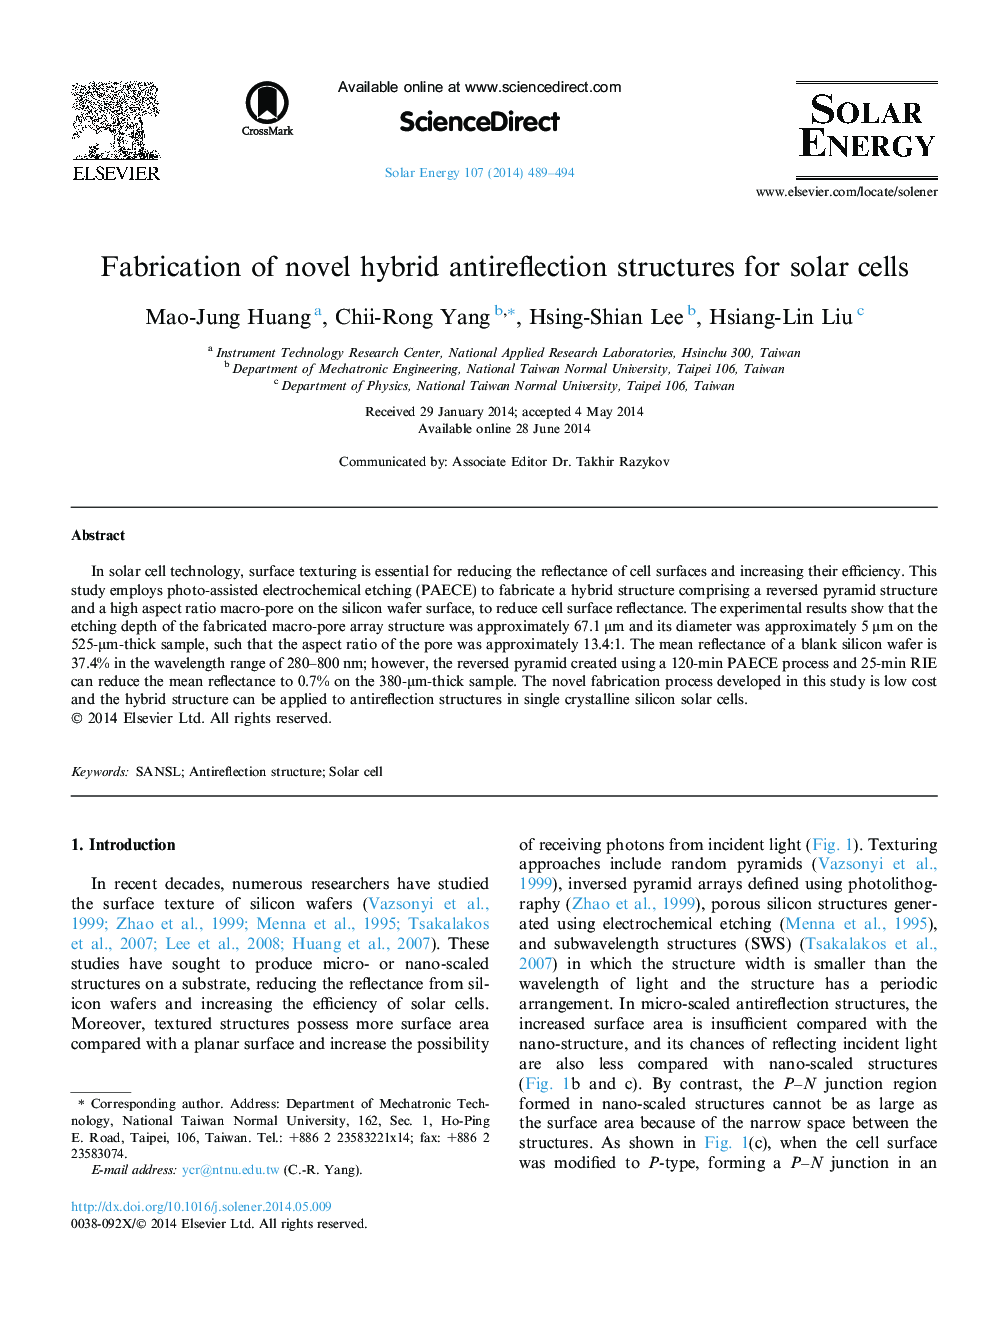 Fabrication of novel hybrid antireflection structures for solar cells